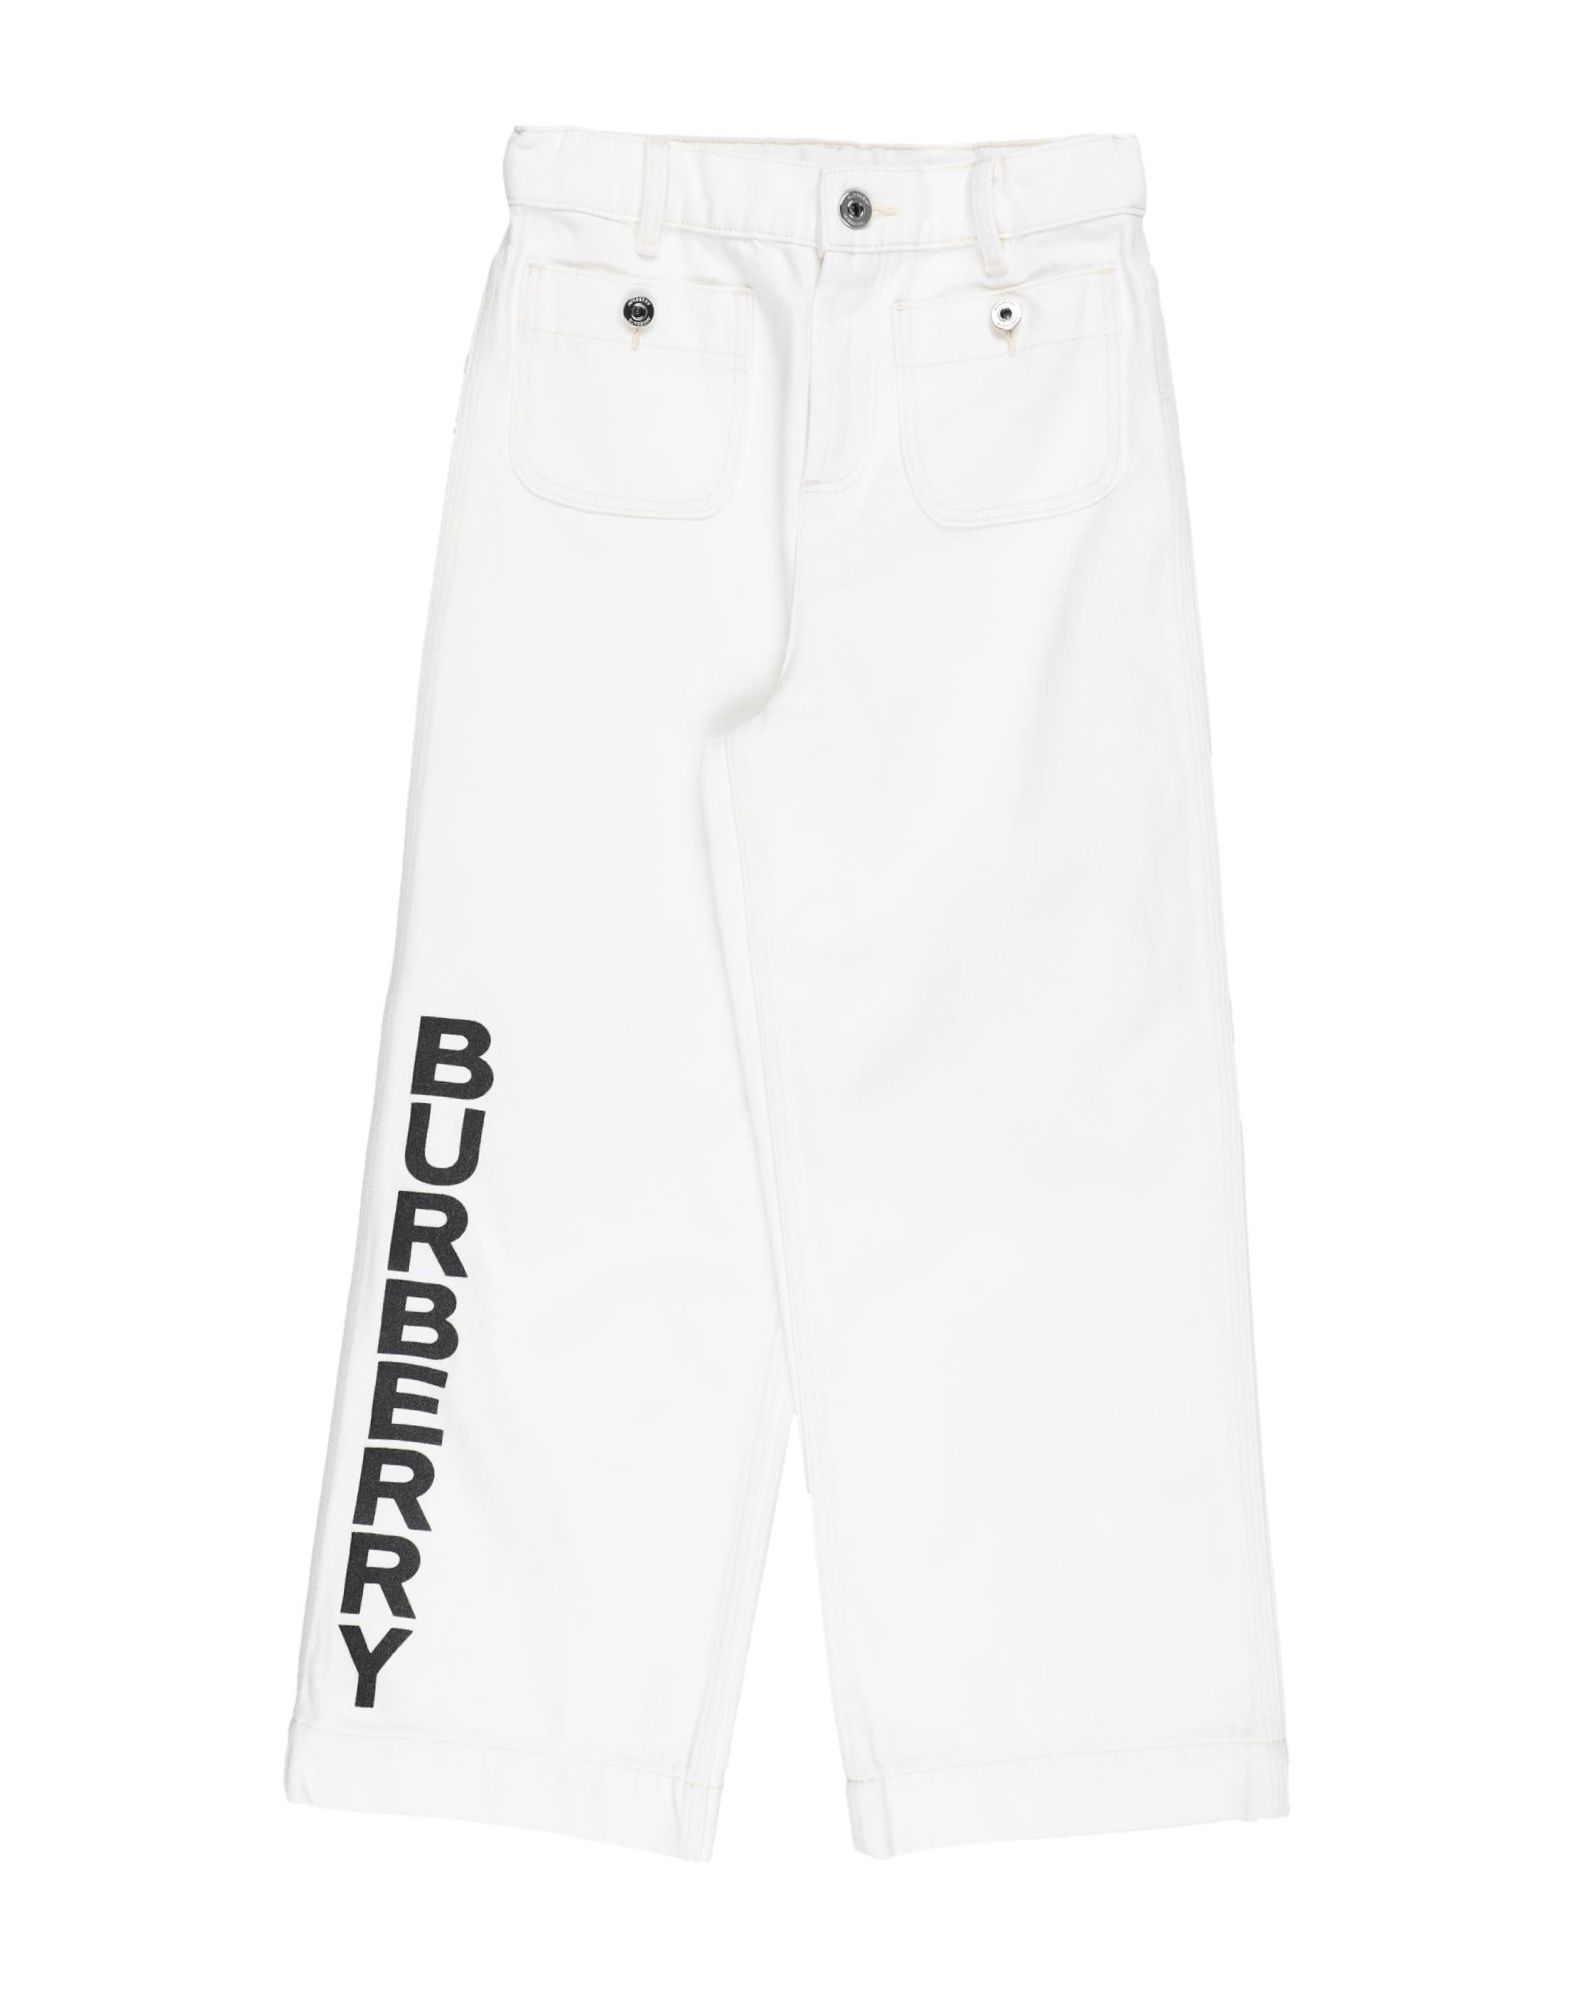 Burberry Kids' Jeans In White